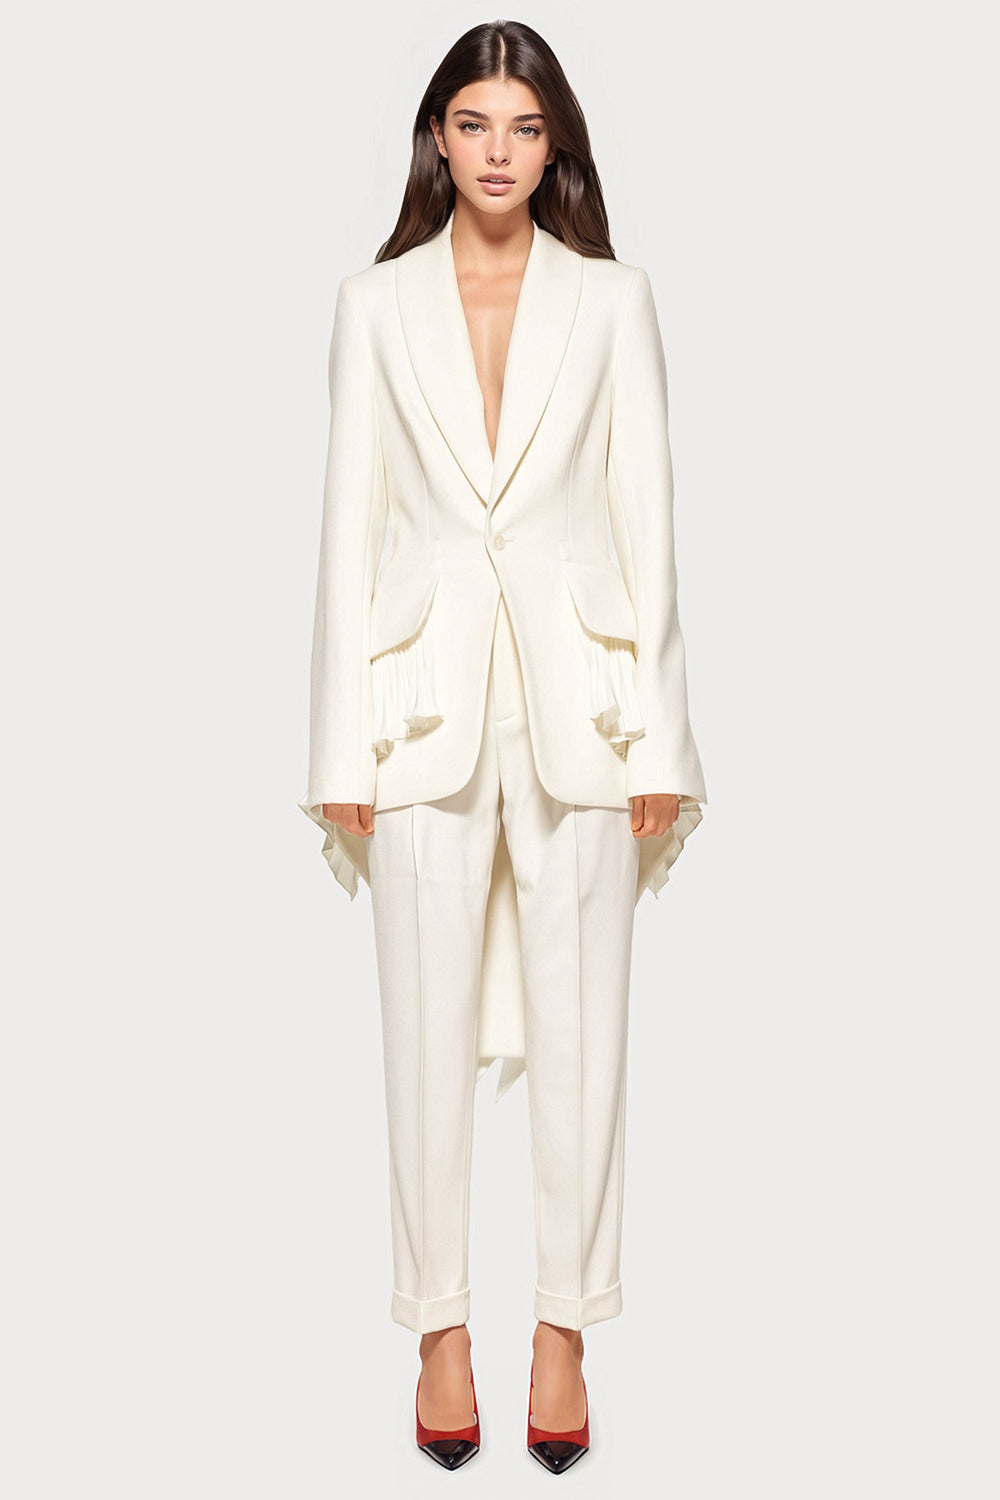 Tailored Blazer with Ruffled Details - White